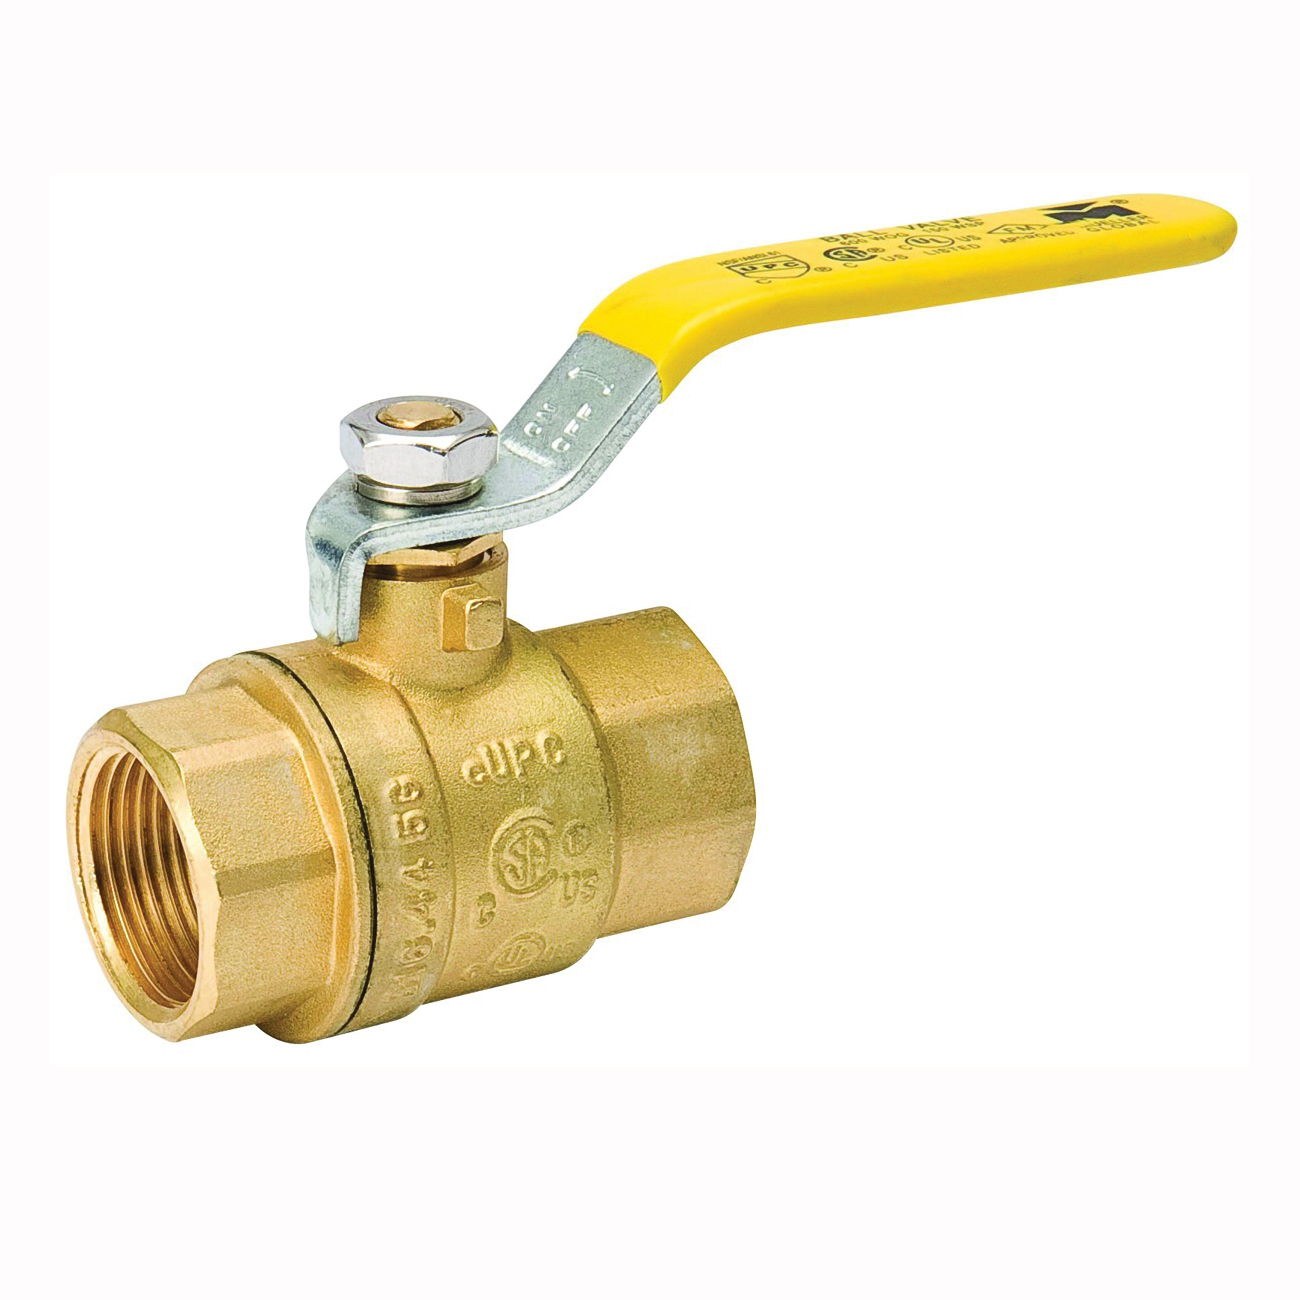 107-823NL Ball Valve, 1/2 in Connection, FPT x FPT, 600/150 psi Pressure, Manual Actuator, Brass Body